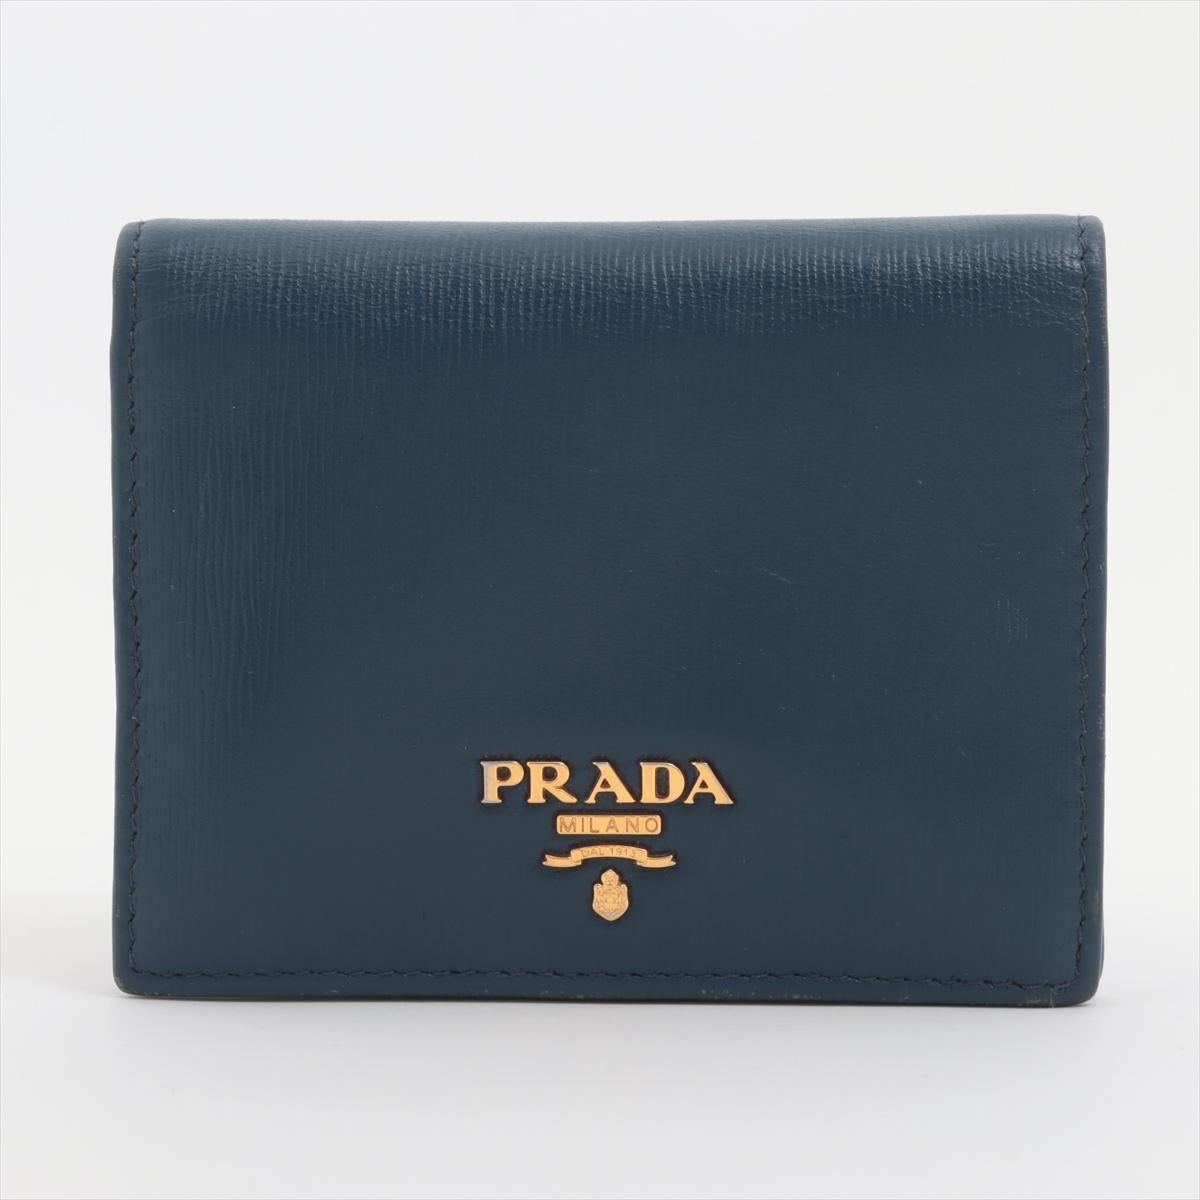 The Prada Vitello Move Leather Compact Wallet in Blue is a chic and versatile accessory that effortlessly combines functionality with luxury. Crafted from Prada's signature Vitello Move leather, the wallet boasts a smooth texture and a rich blue